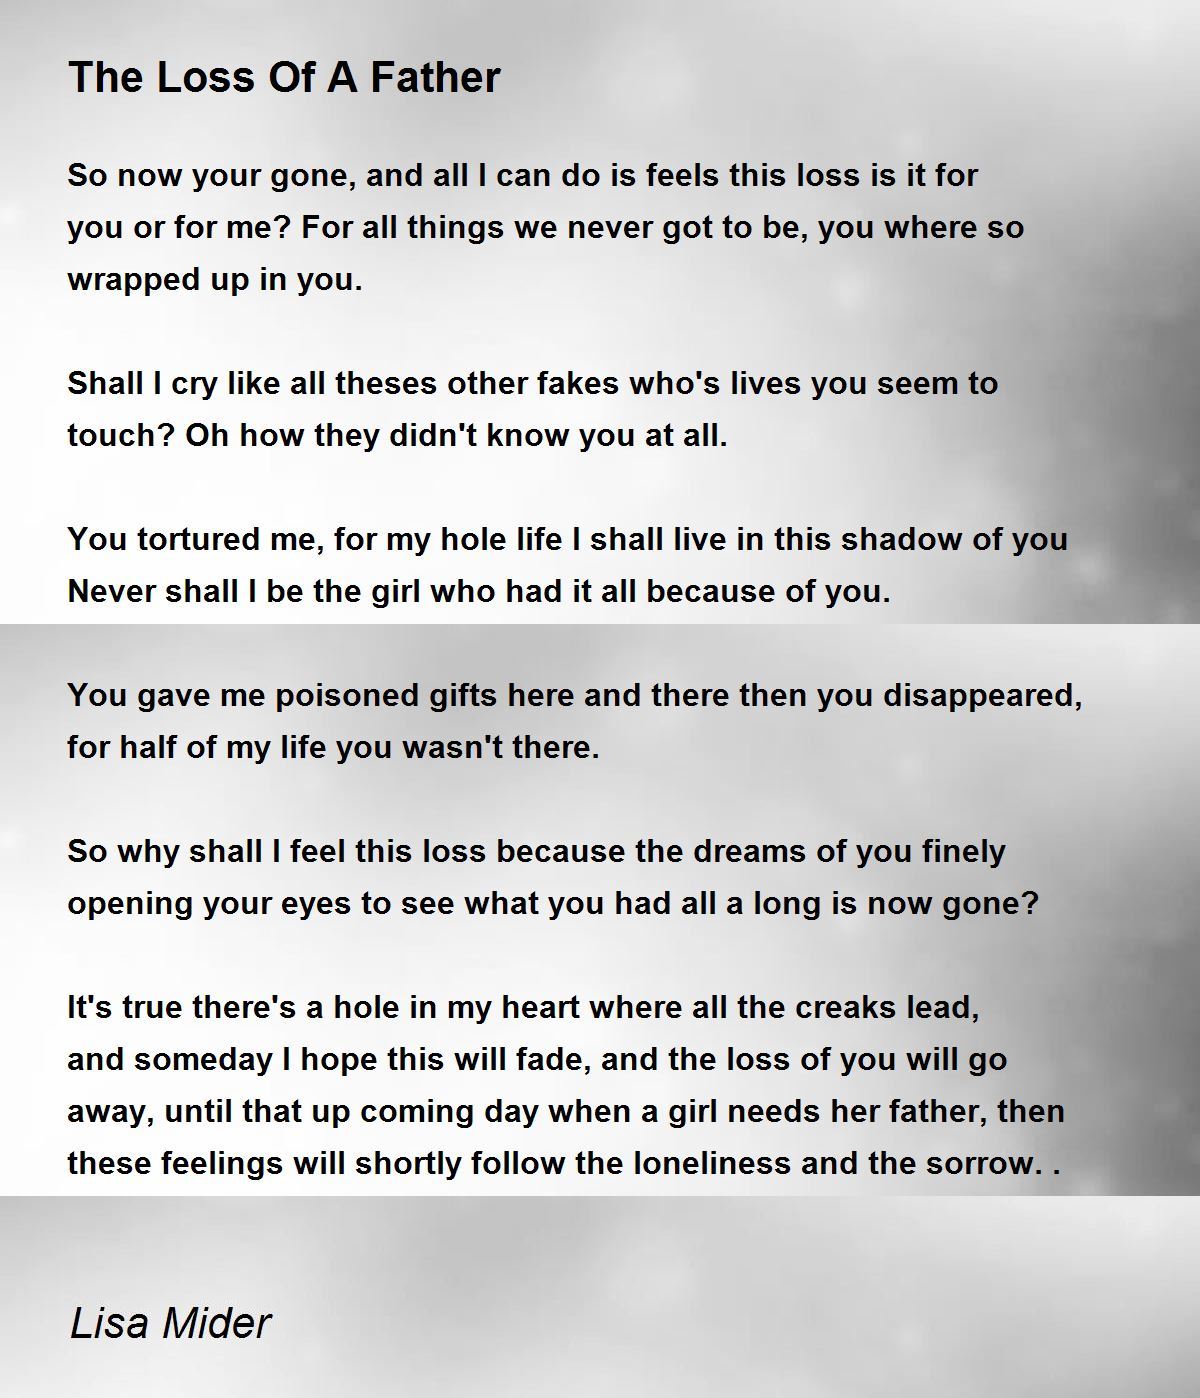 The Loss Of A Father Poem By Lisa Mider